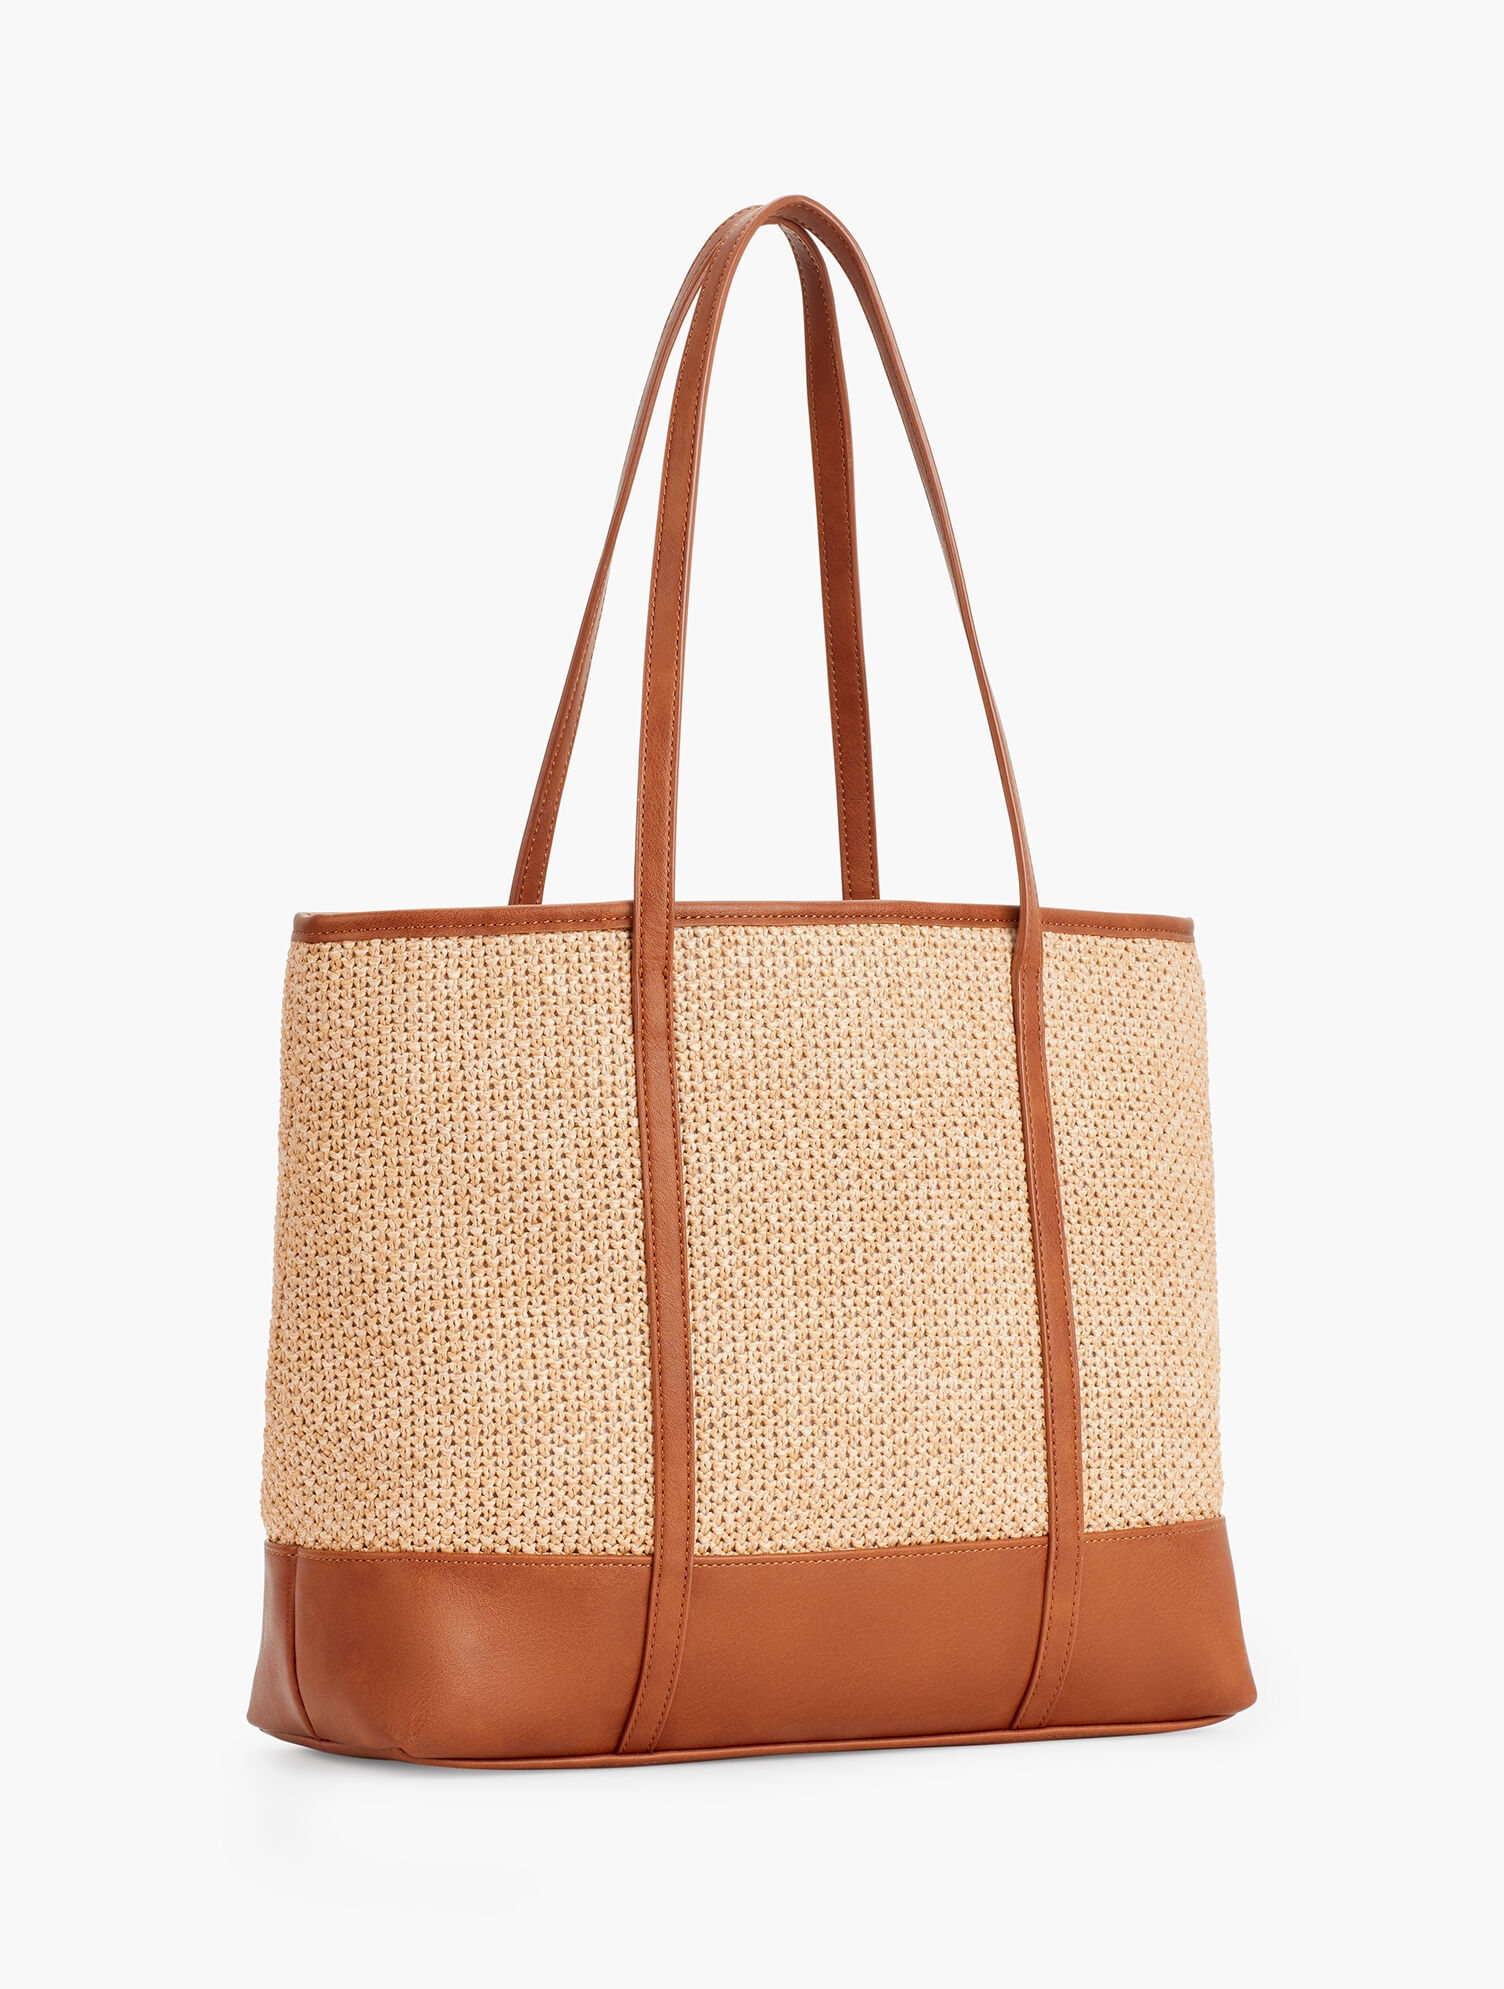 Packable Straw Tote Bag - Natural | Talbots